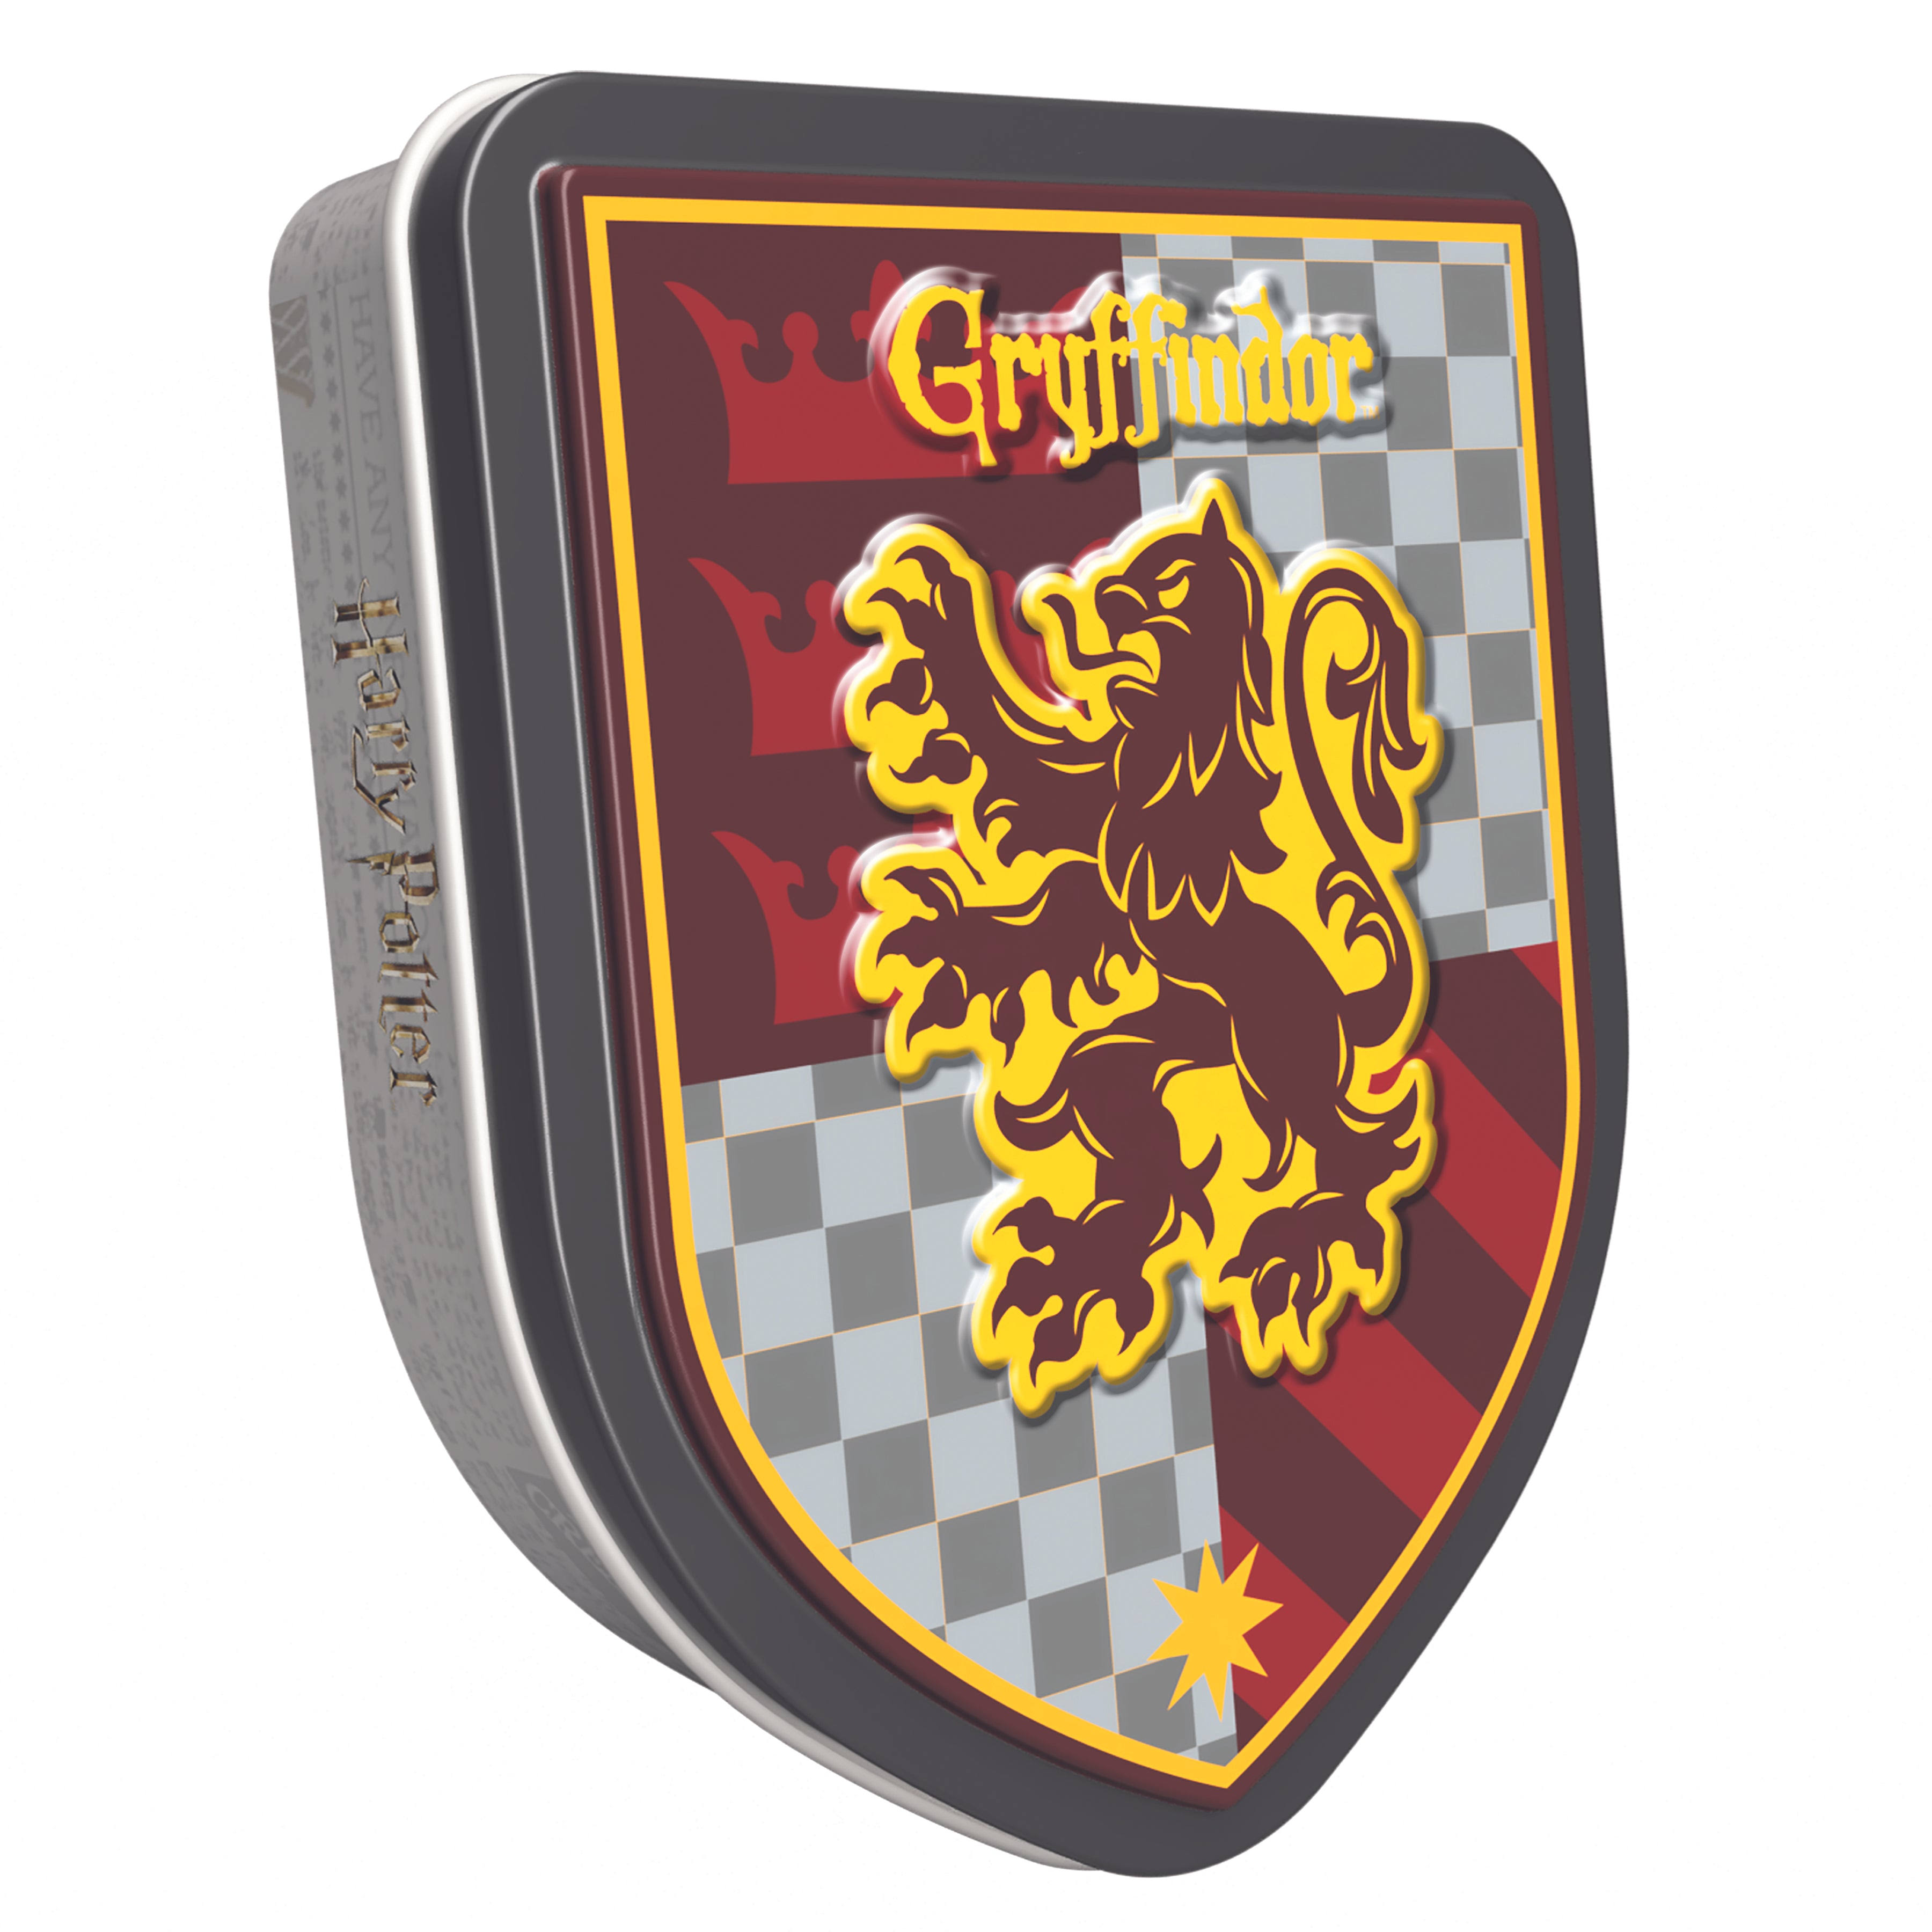 Jelly Belly Harry Potter Crest Tin - 24 Pack